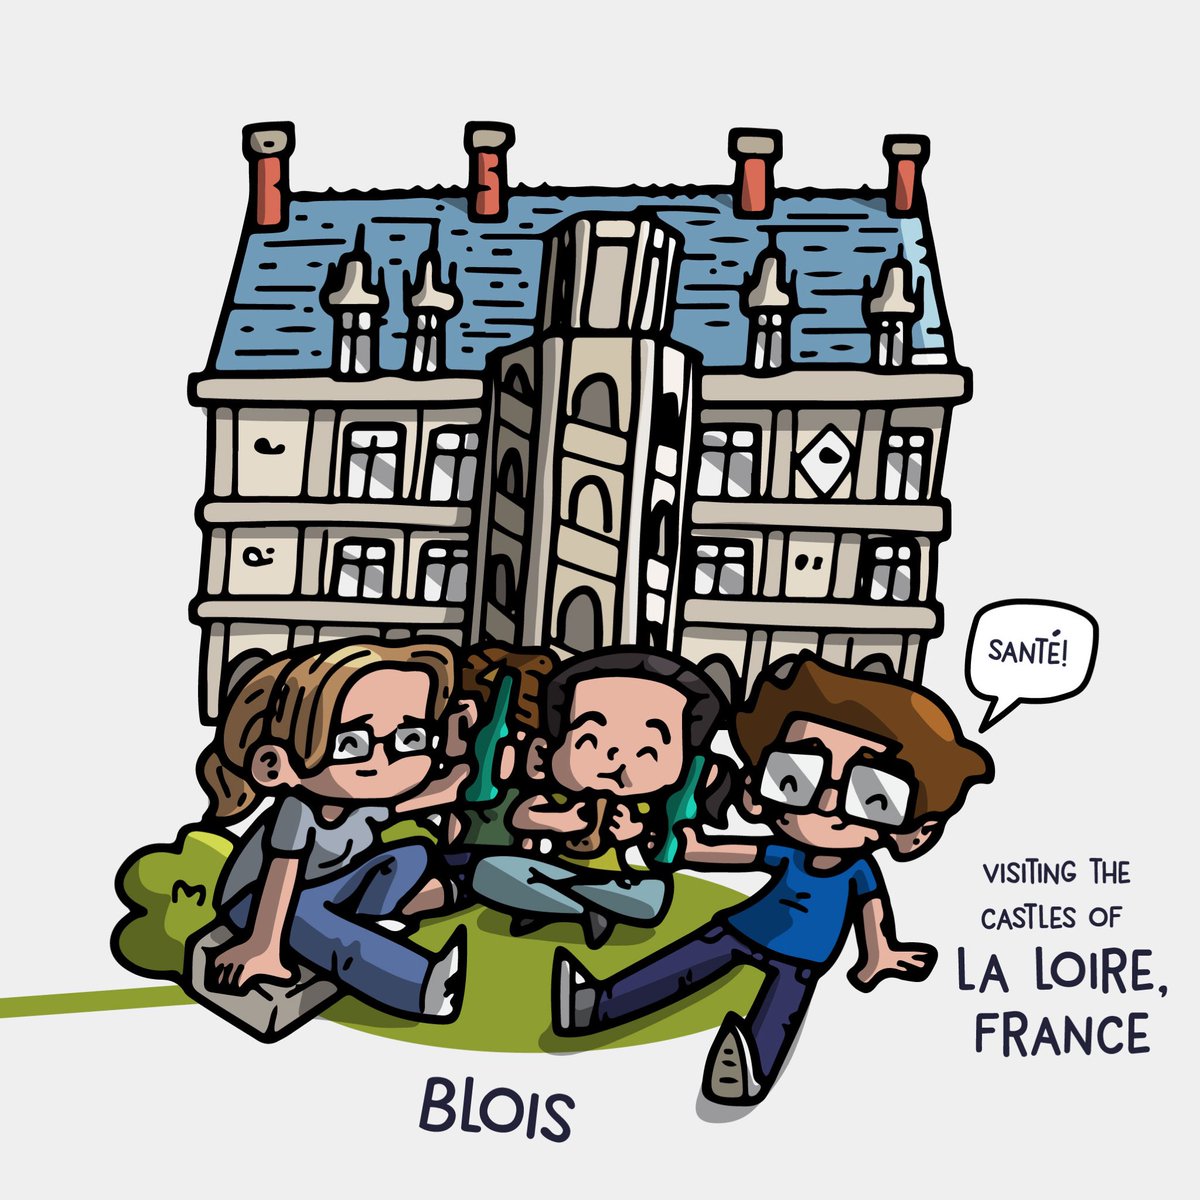 Another old #traveltoon from France. This happened in 2007, and my wife and I just realized we were both in France on those same dates!
.
.
#travel #france #laloire #chenonceau #ambois #blois #castles #castlesoffrance #french #illustrator #illustrationartists #draw #drawings